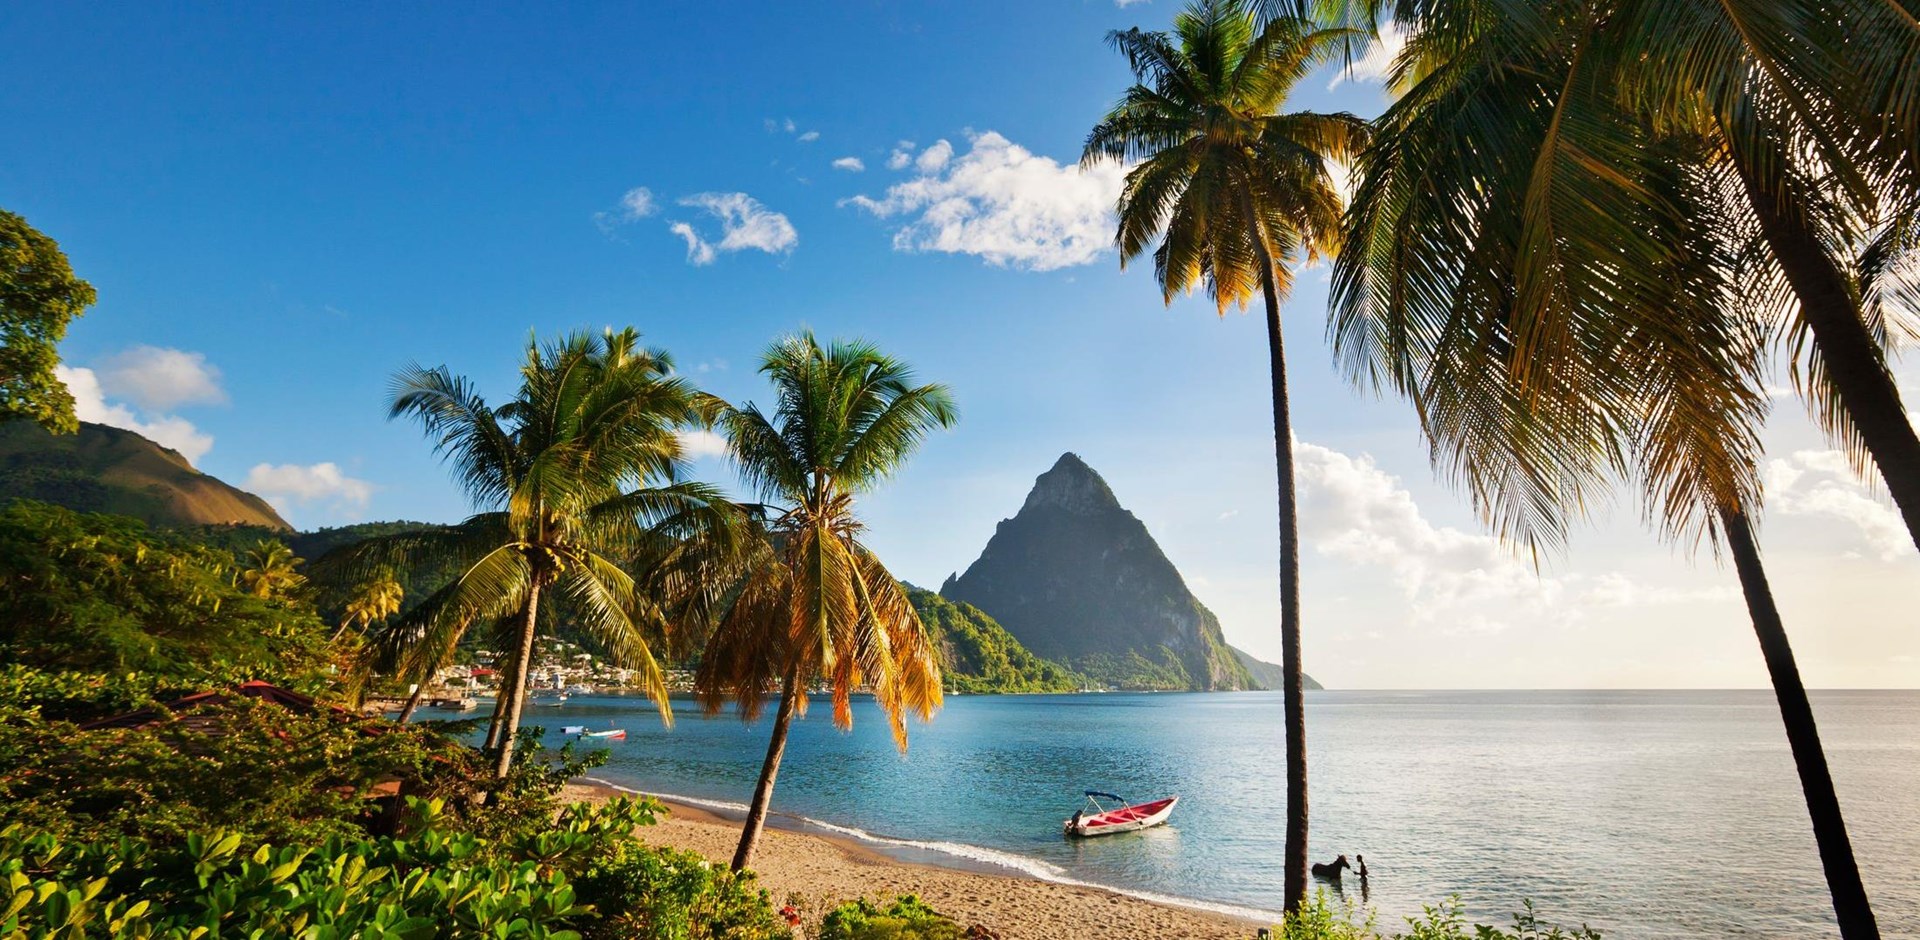 085096-Soufriere-Seafront-001-Cr-St-Lucia-Tourism-Authority-Hybris